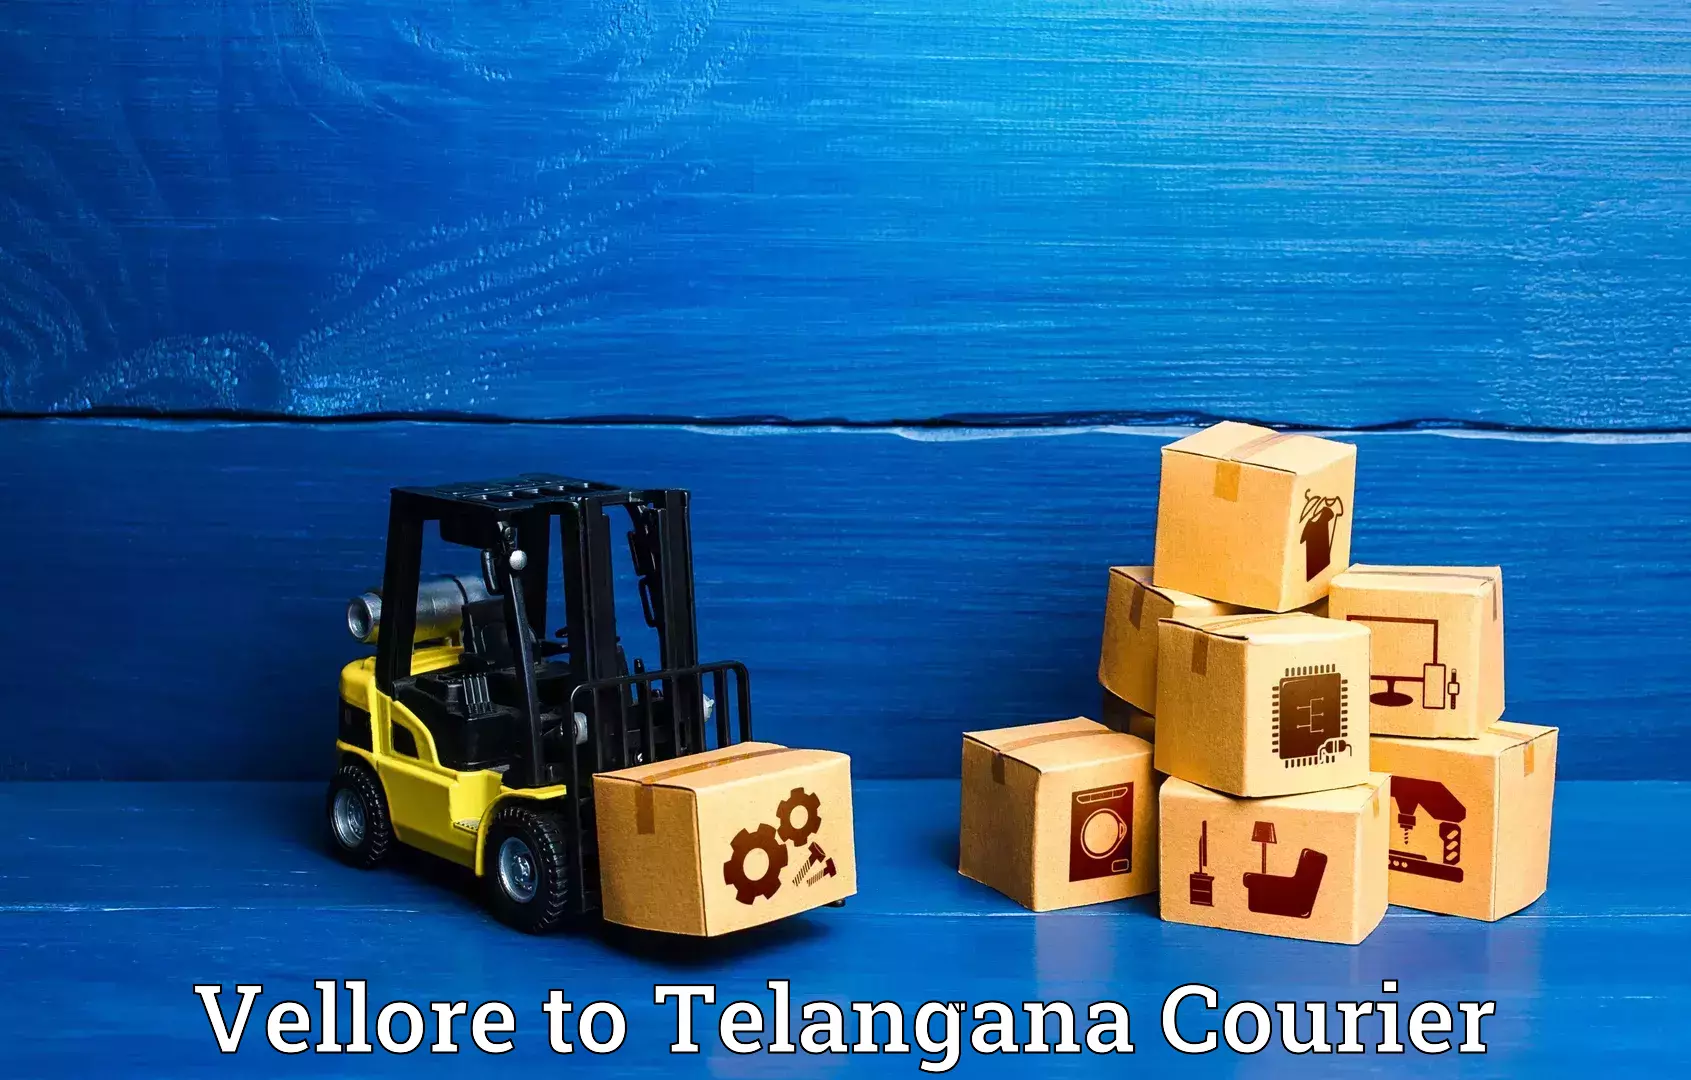 Luggage delivery system Vellore to Yellareddy